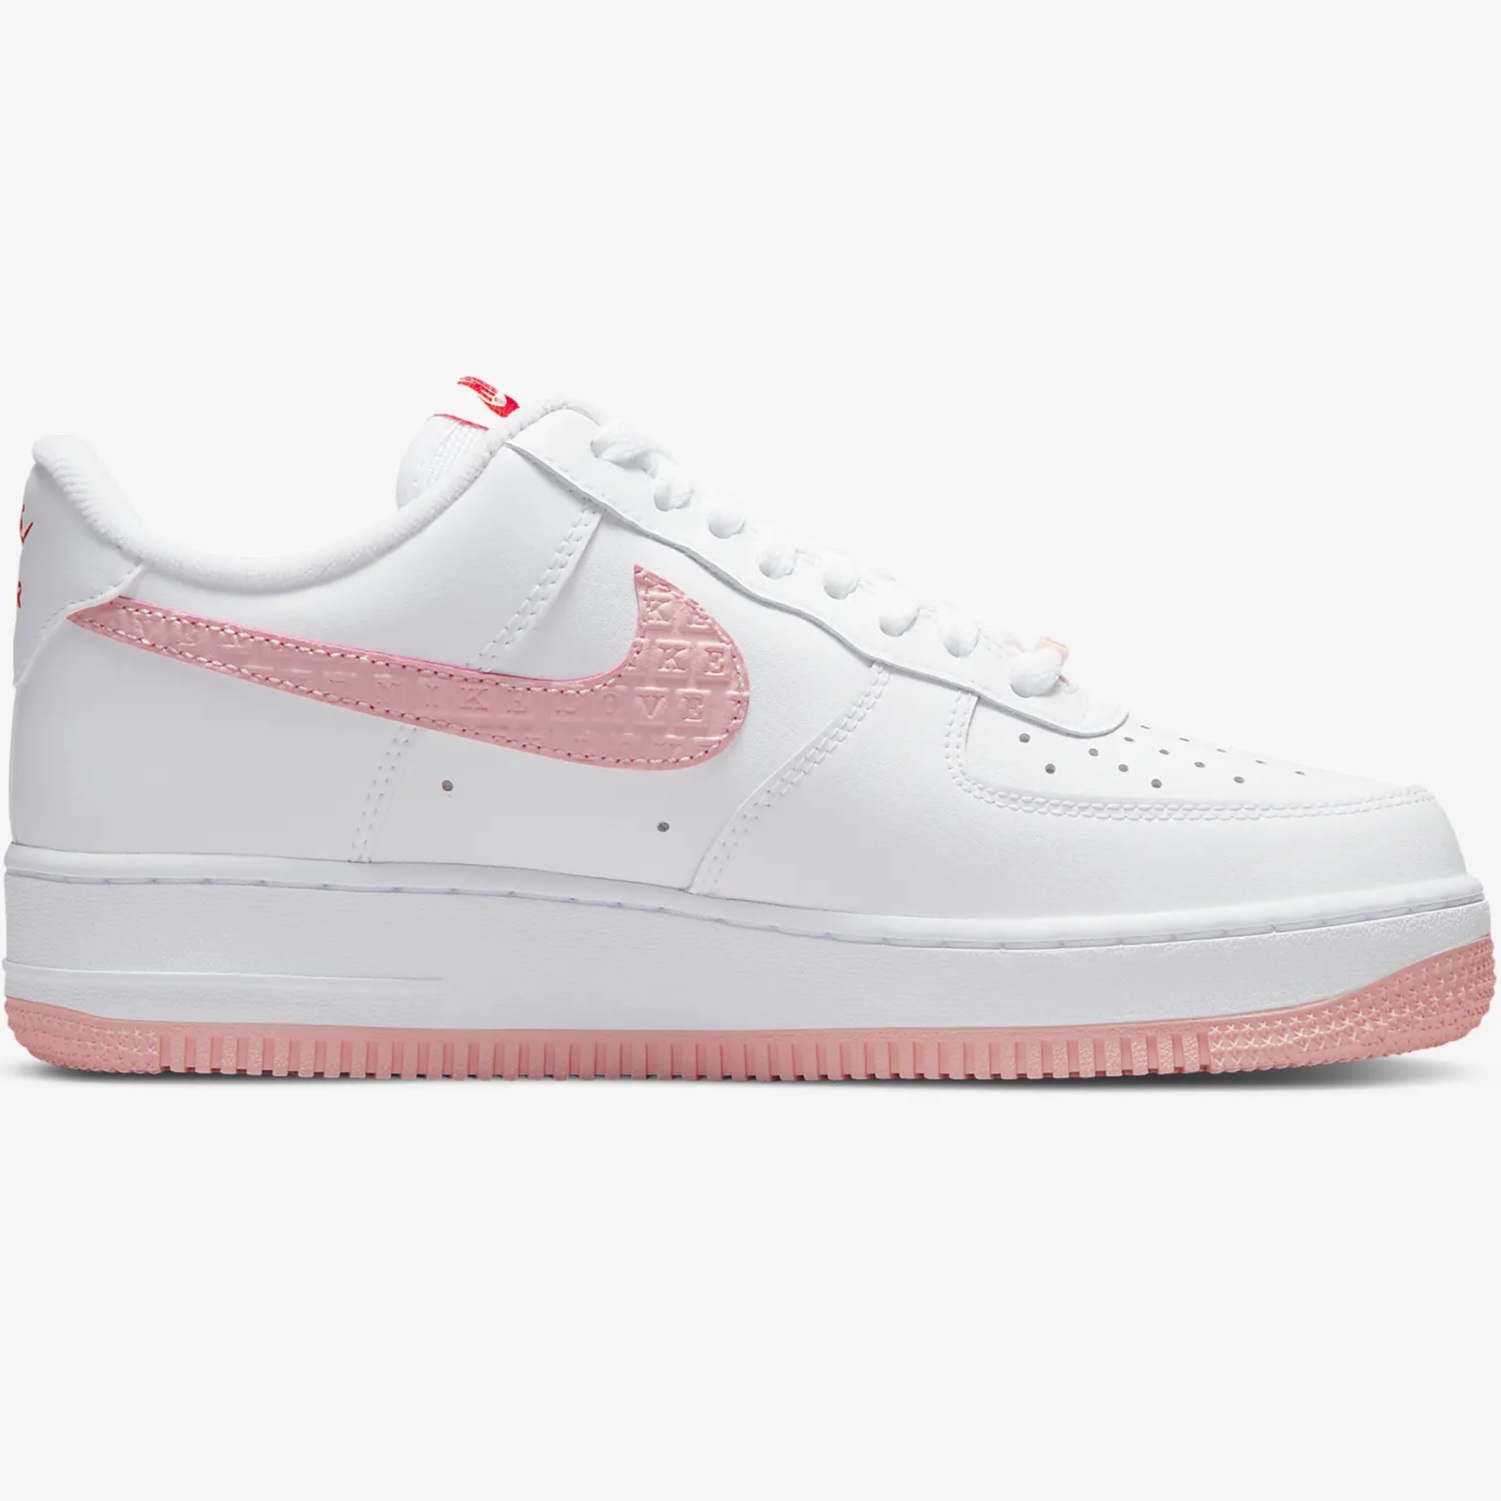 GIÀY NỮ NIKE AIR FORCE 1 07 LOW VD VALENTINE S DAY WHITE ATMOSPHERE UNIVERSITY RED SAIL DQ9320-100 2